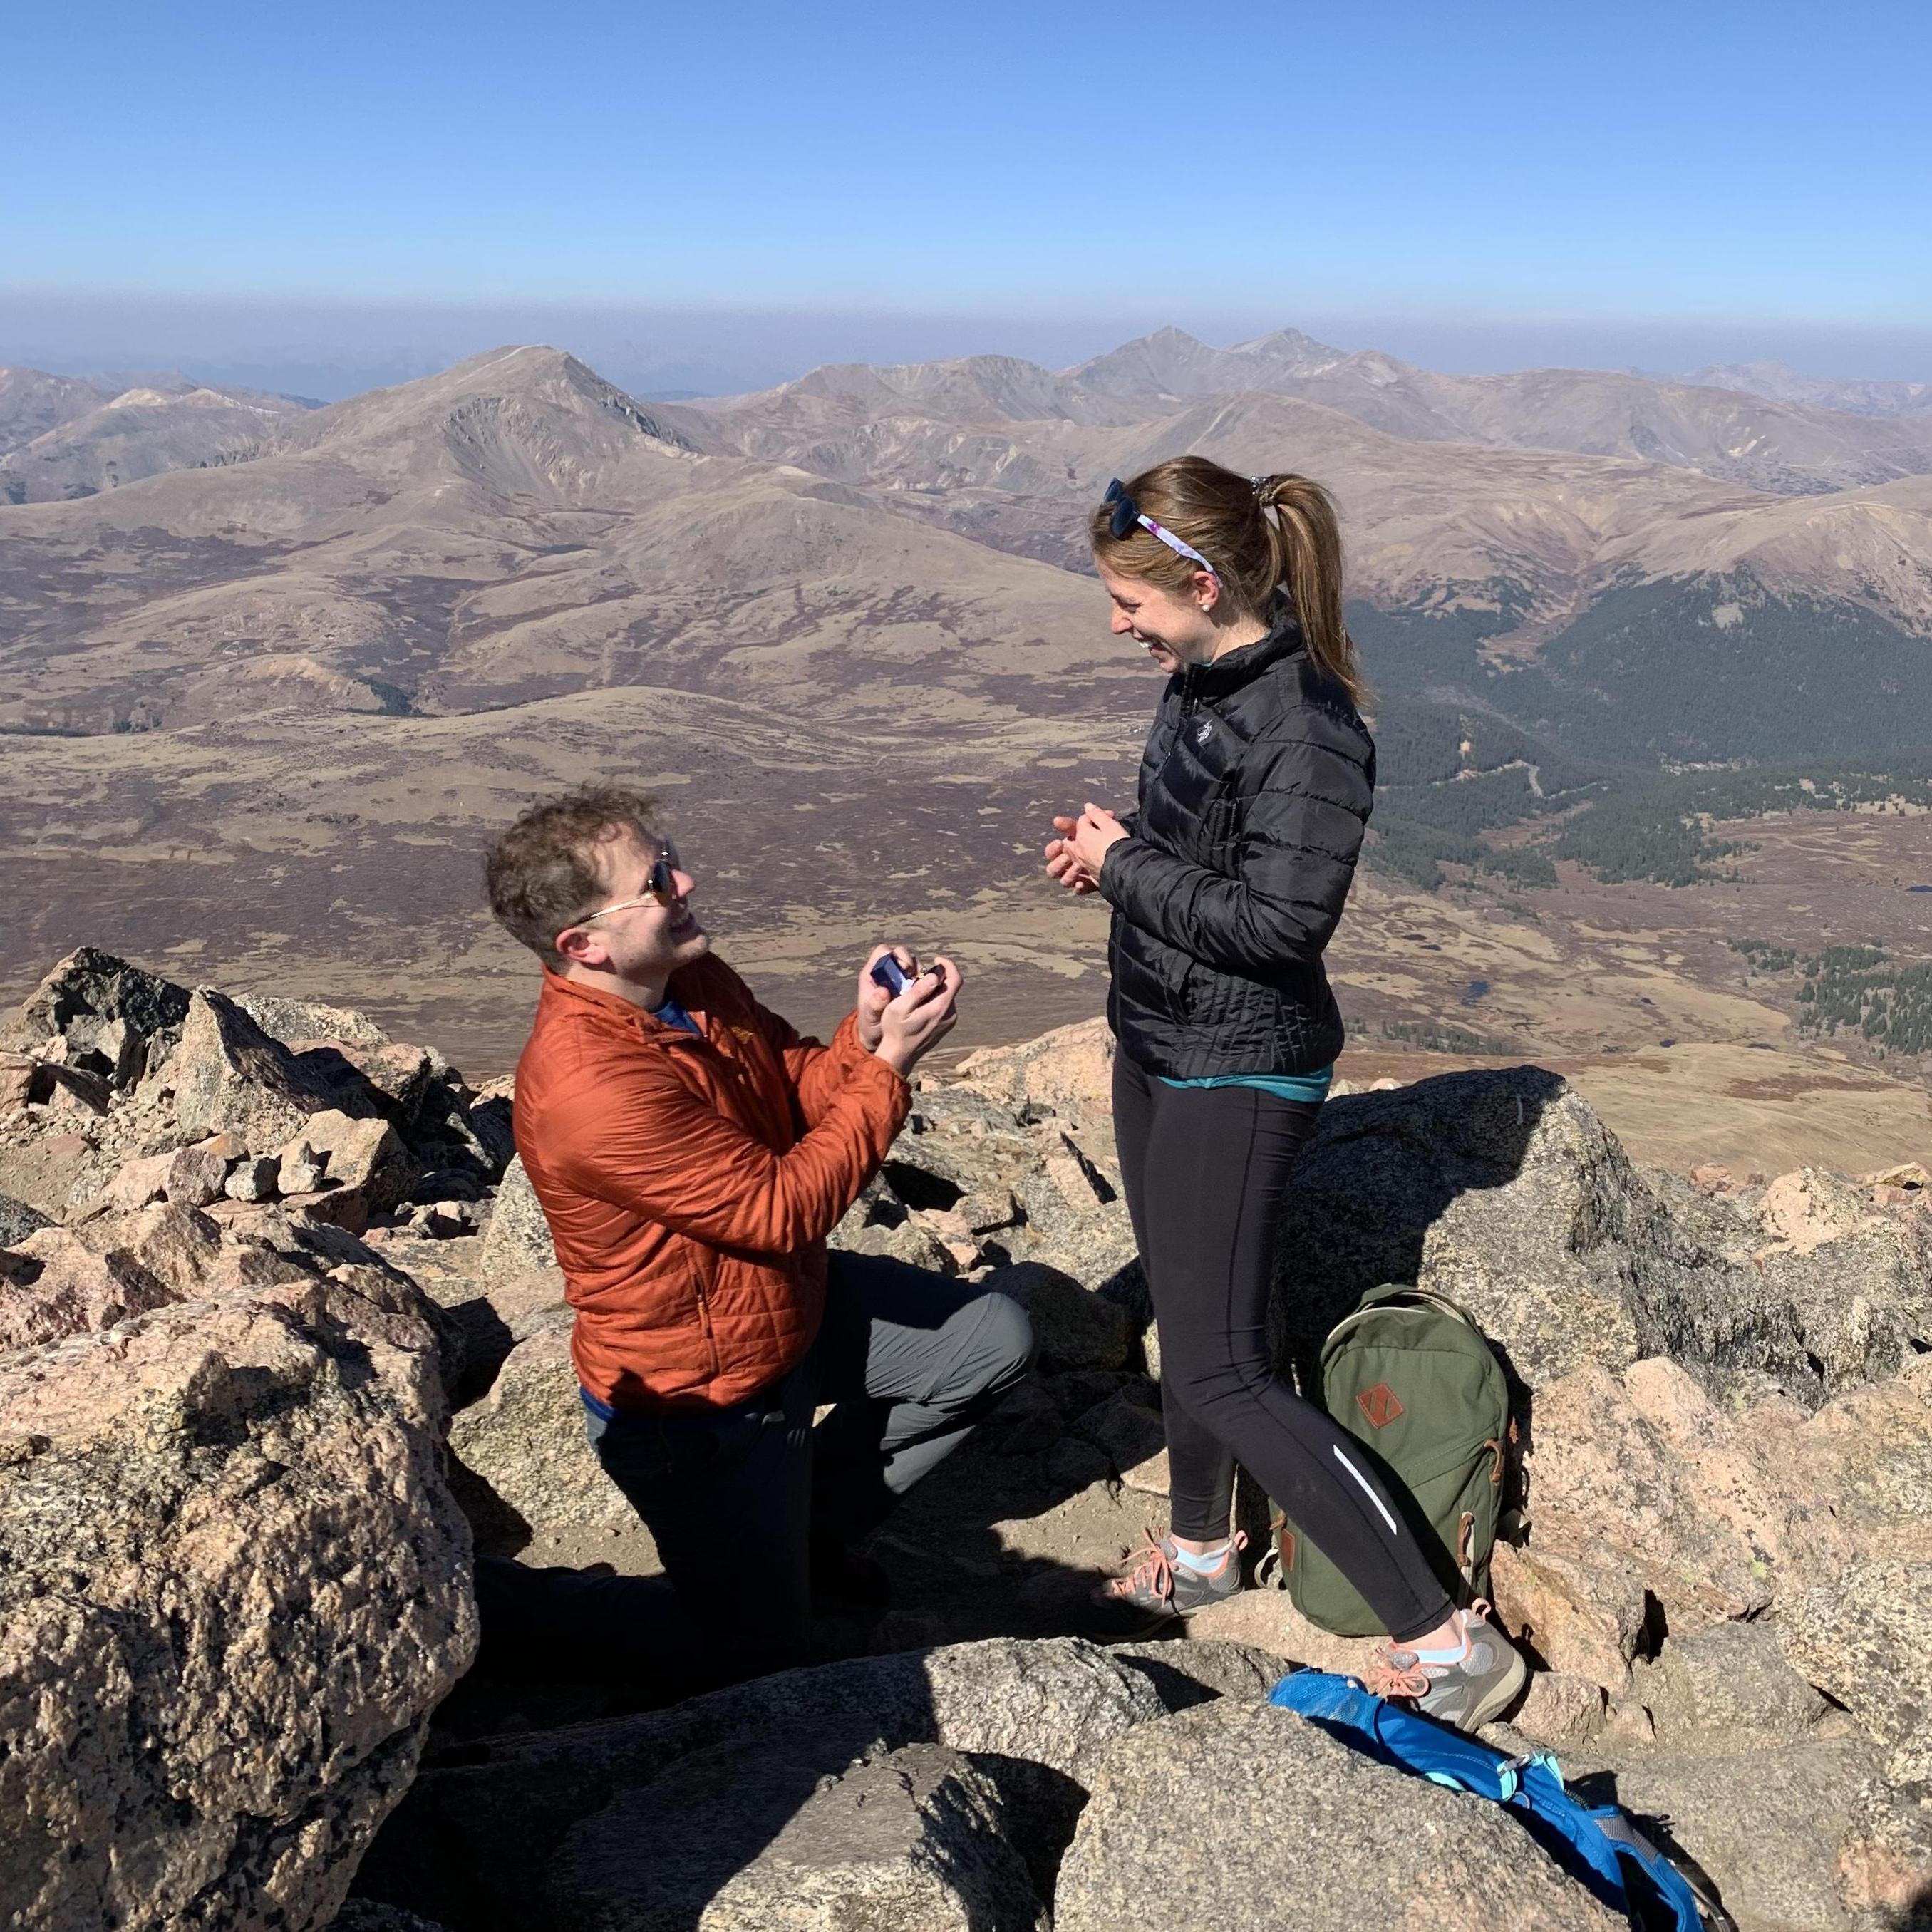 Gary proposed on the top of Mt. Bierstadt in Colorado!